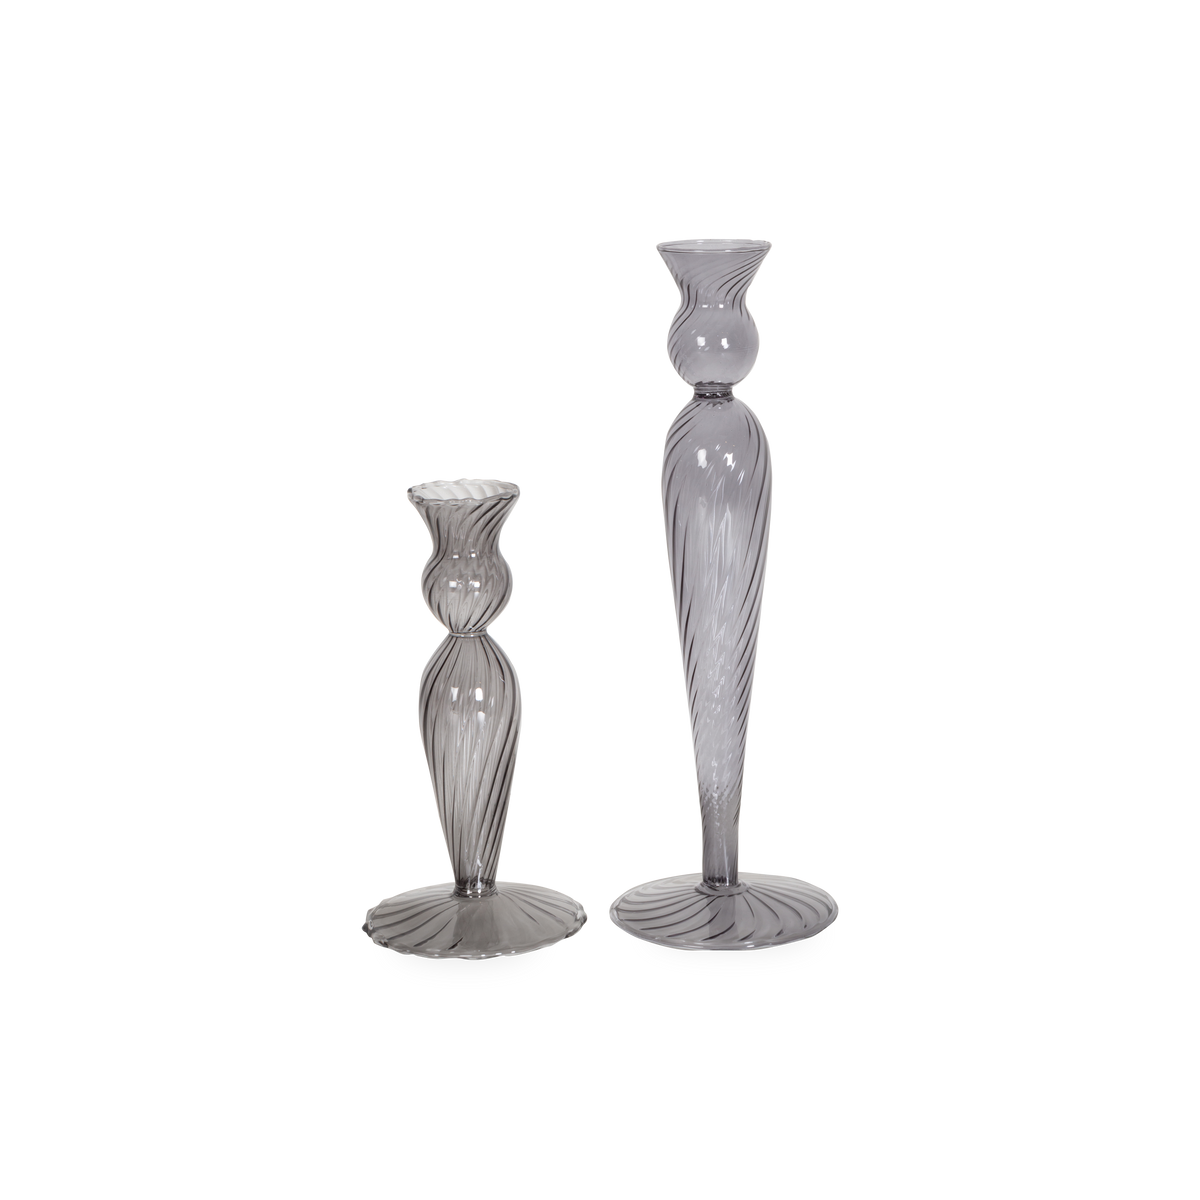 Bringing a touch of sophisticated design, the Swirl Glass Candle Holder features a visually pirouetting, tall silhouette and gentle curves.